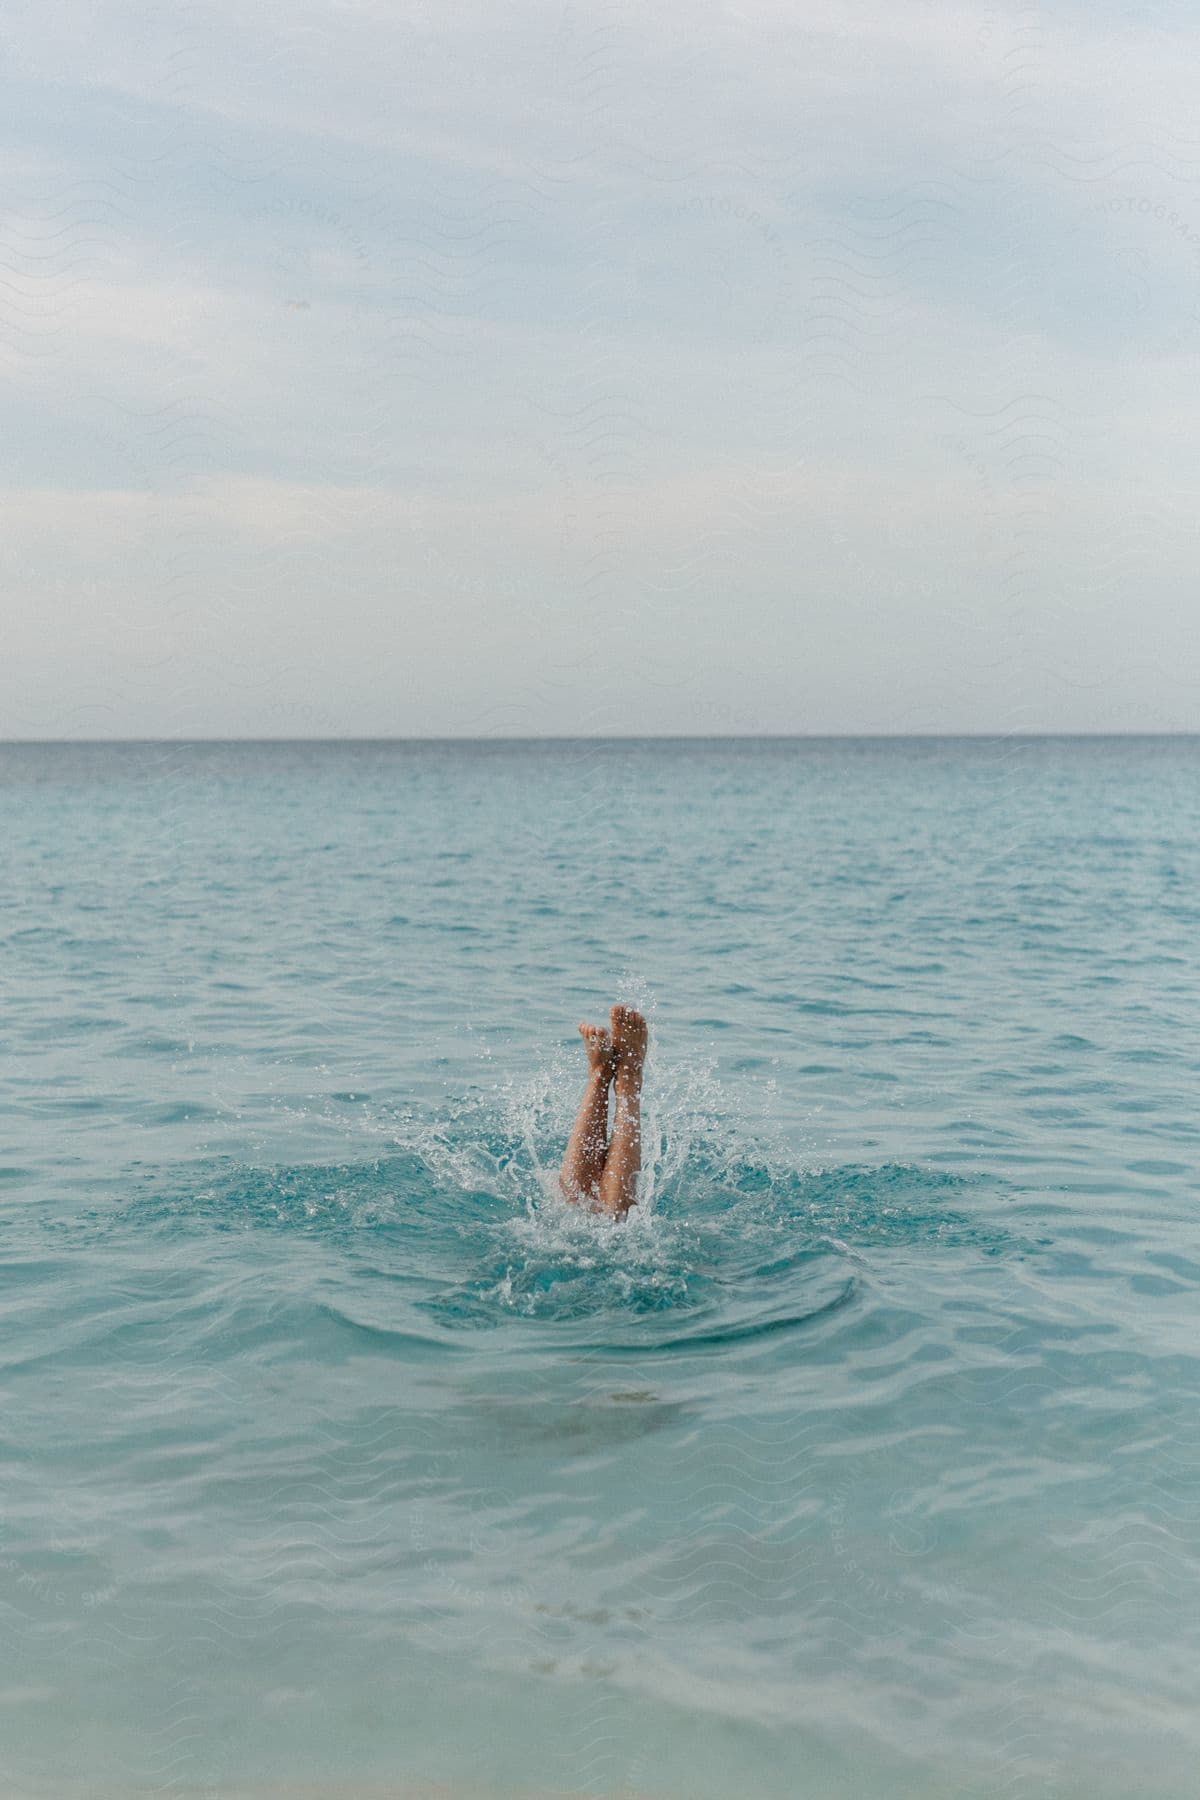 A person enjoying a swim in the sea at the beach